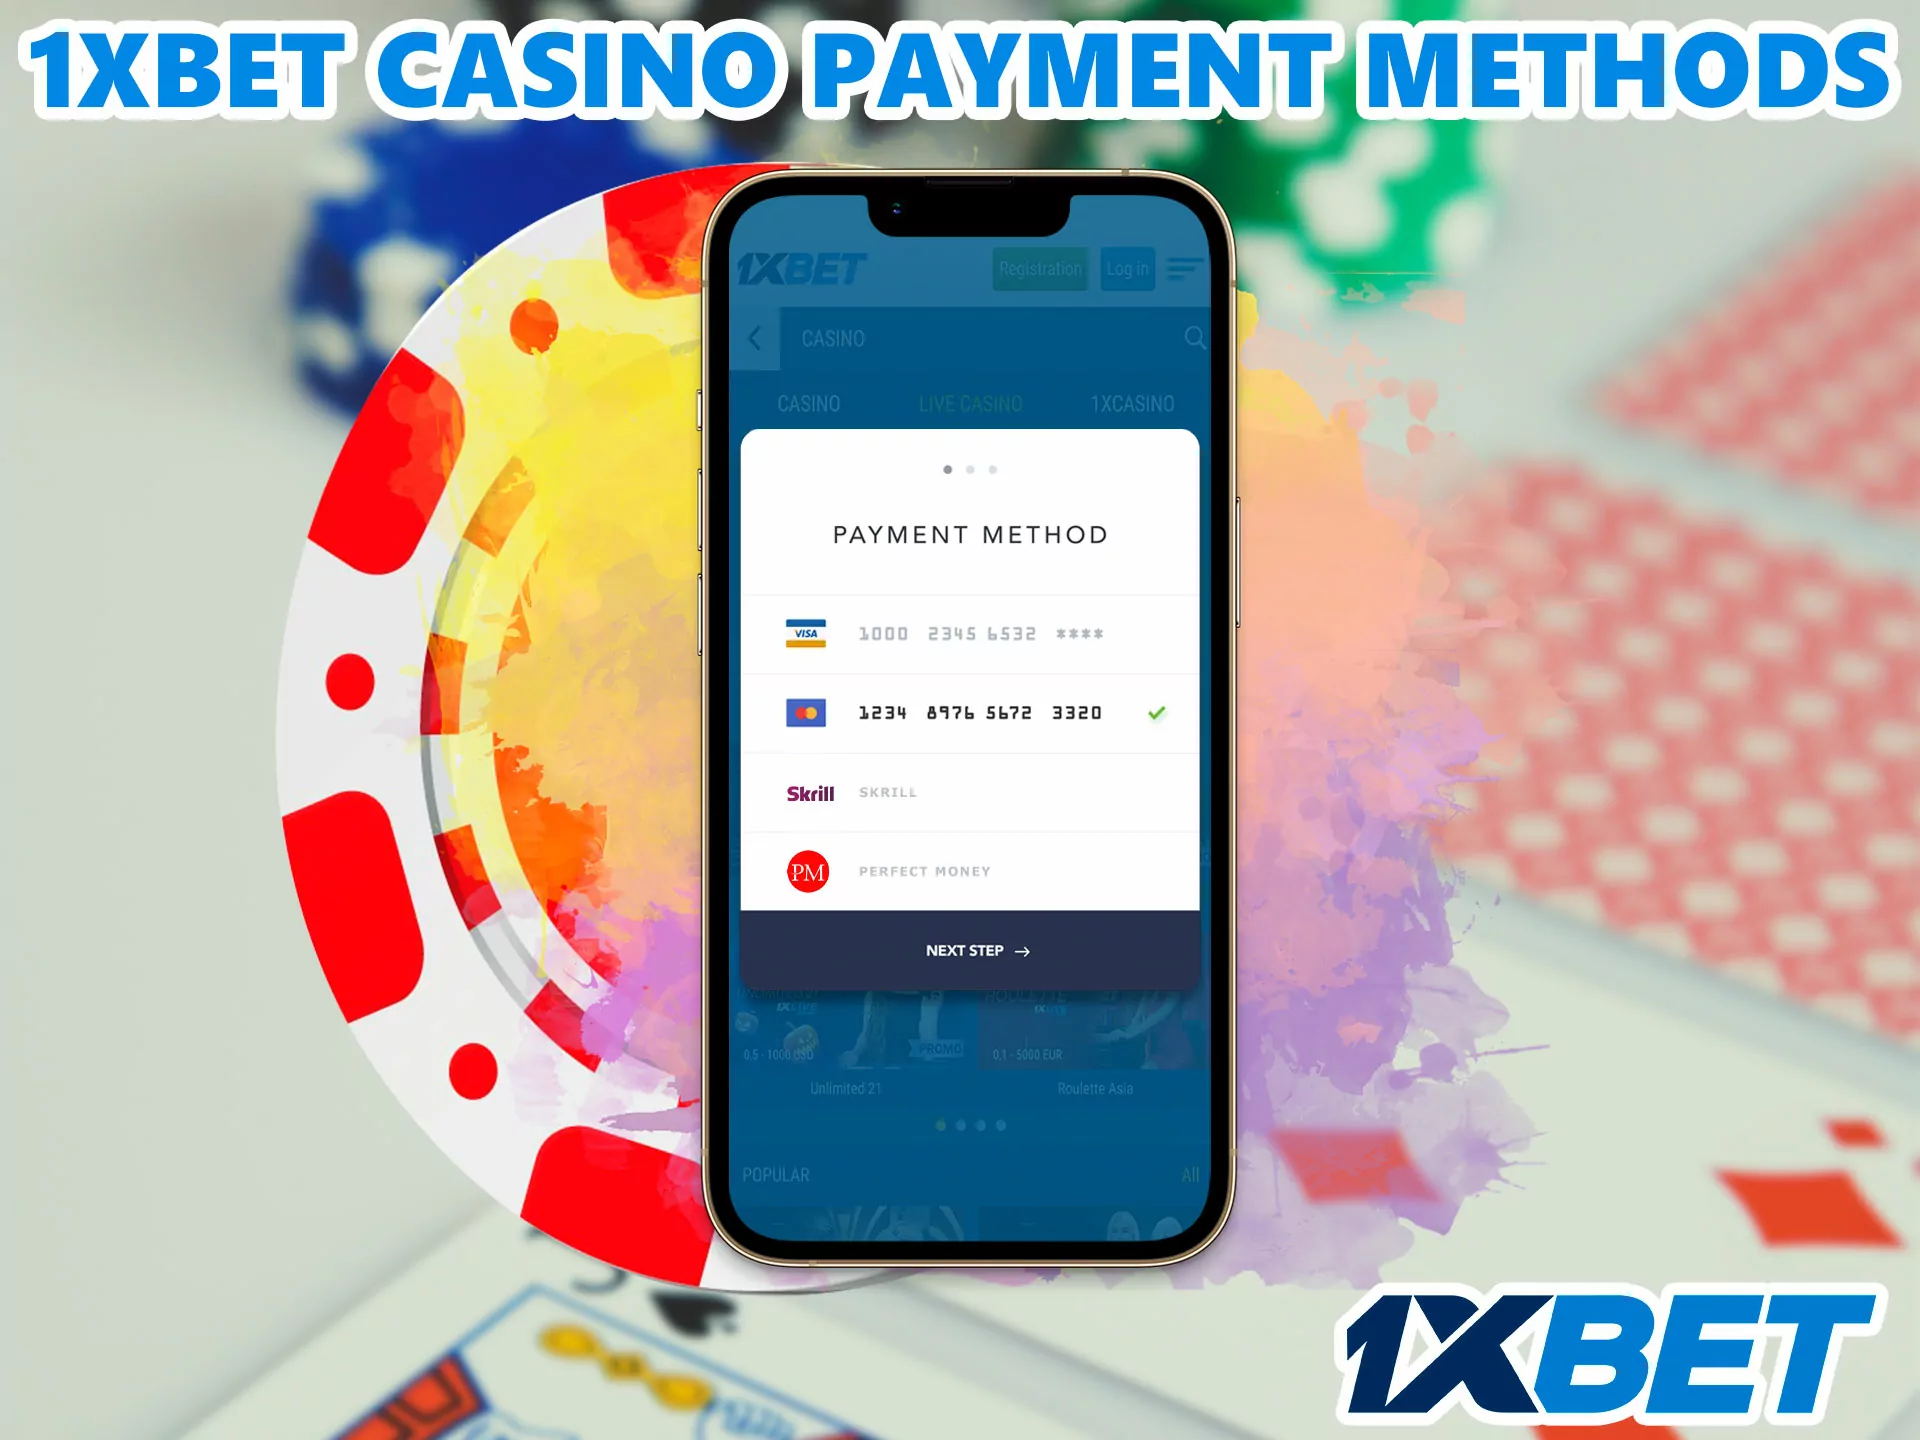 It is very simple and convenient for residents of Bangladesh to withdraw and replenish a virtual gaming account, popular aggregators and systems are available.